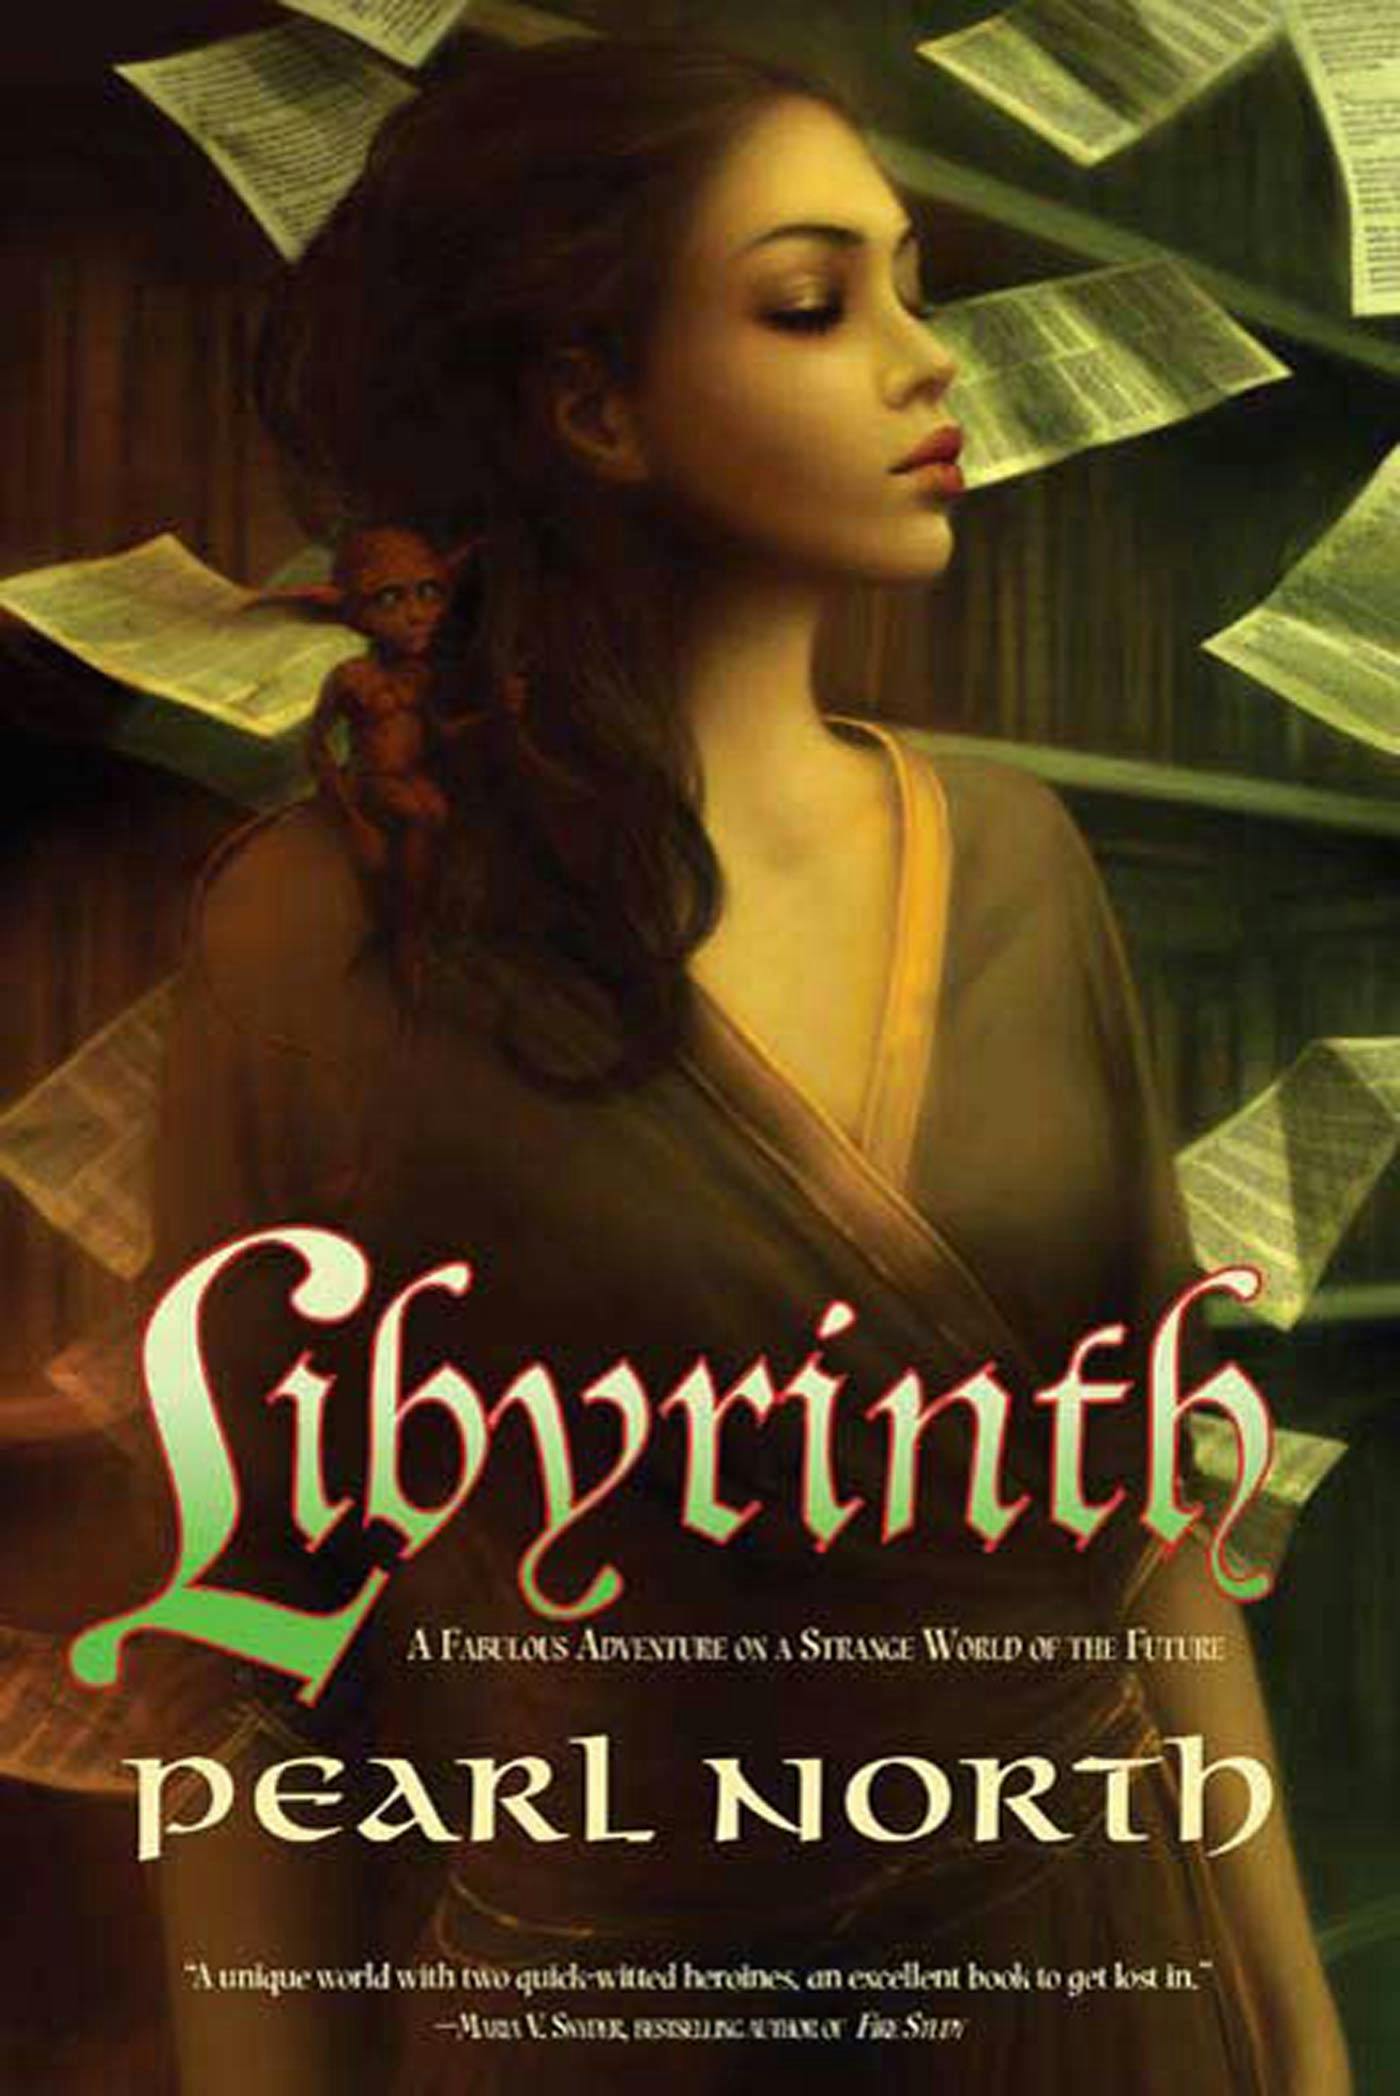 Cover for the book titled as: Libyrinth